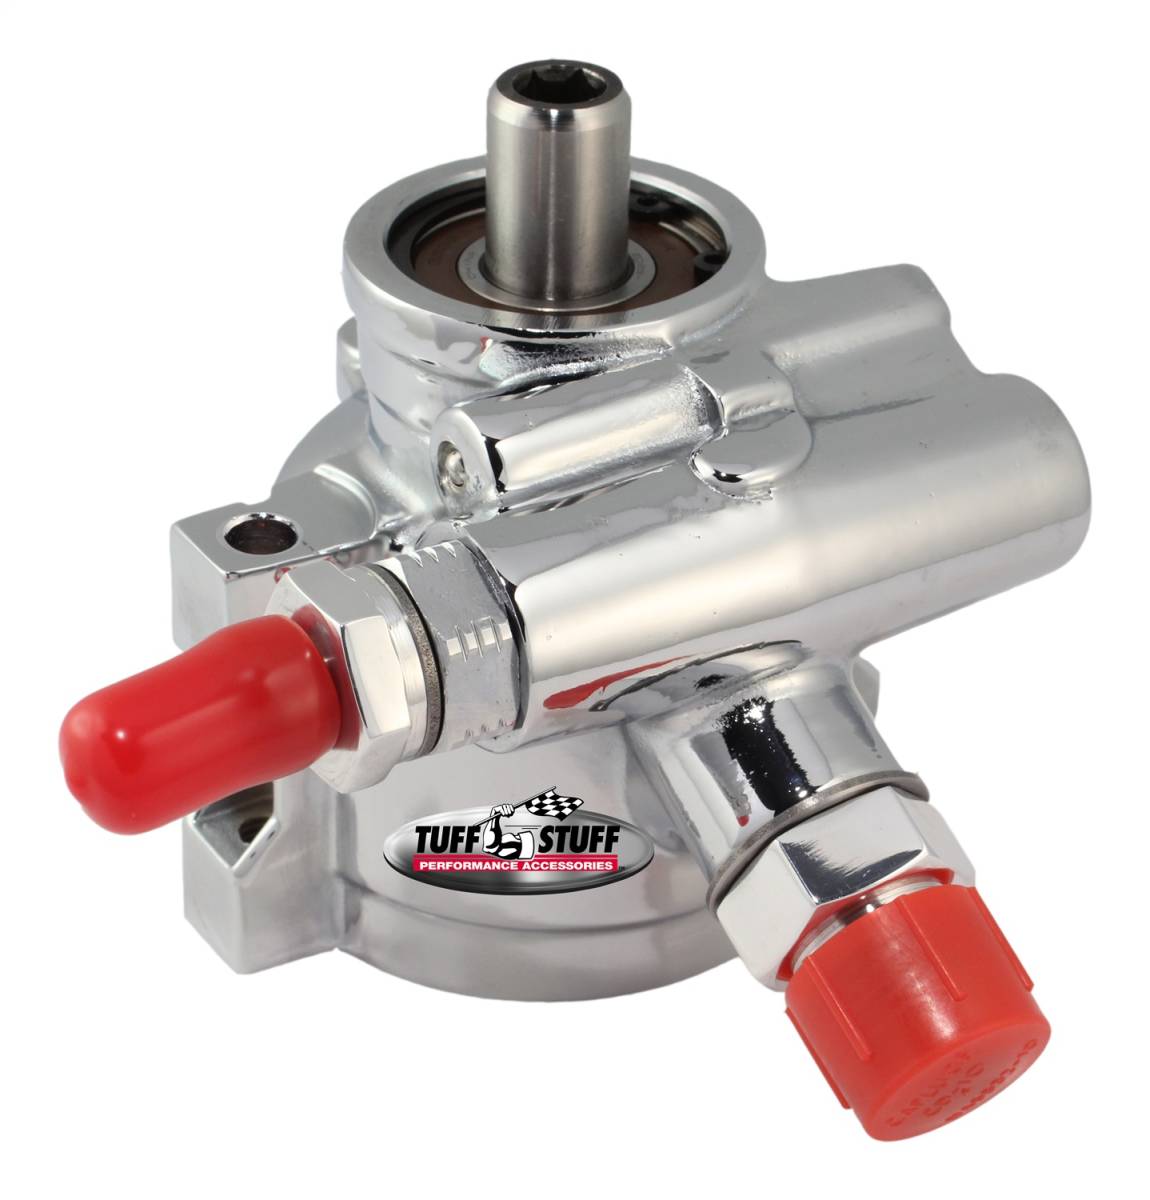 Tuff Stuff Performance - Type II Alum. Power Steering Pump AN-6 And AN-10 Fitting 8mm Through Hole Mounting Btm Pressure Port Aluminum For Street Rods/Custom Vehicles w/Limited Engine Space Polished 6170ALP